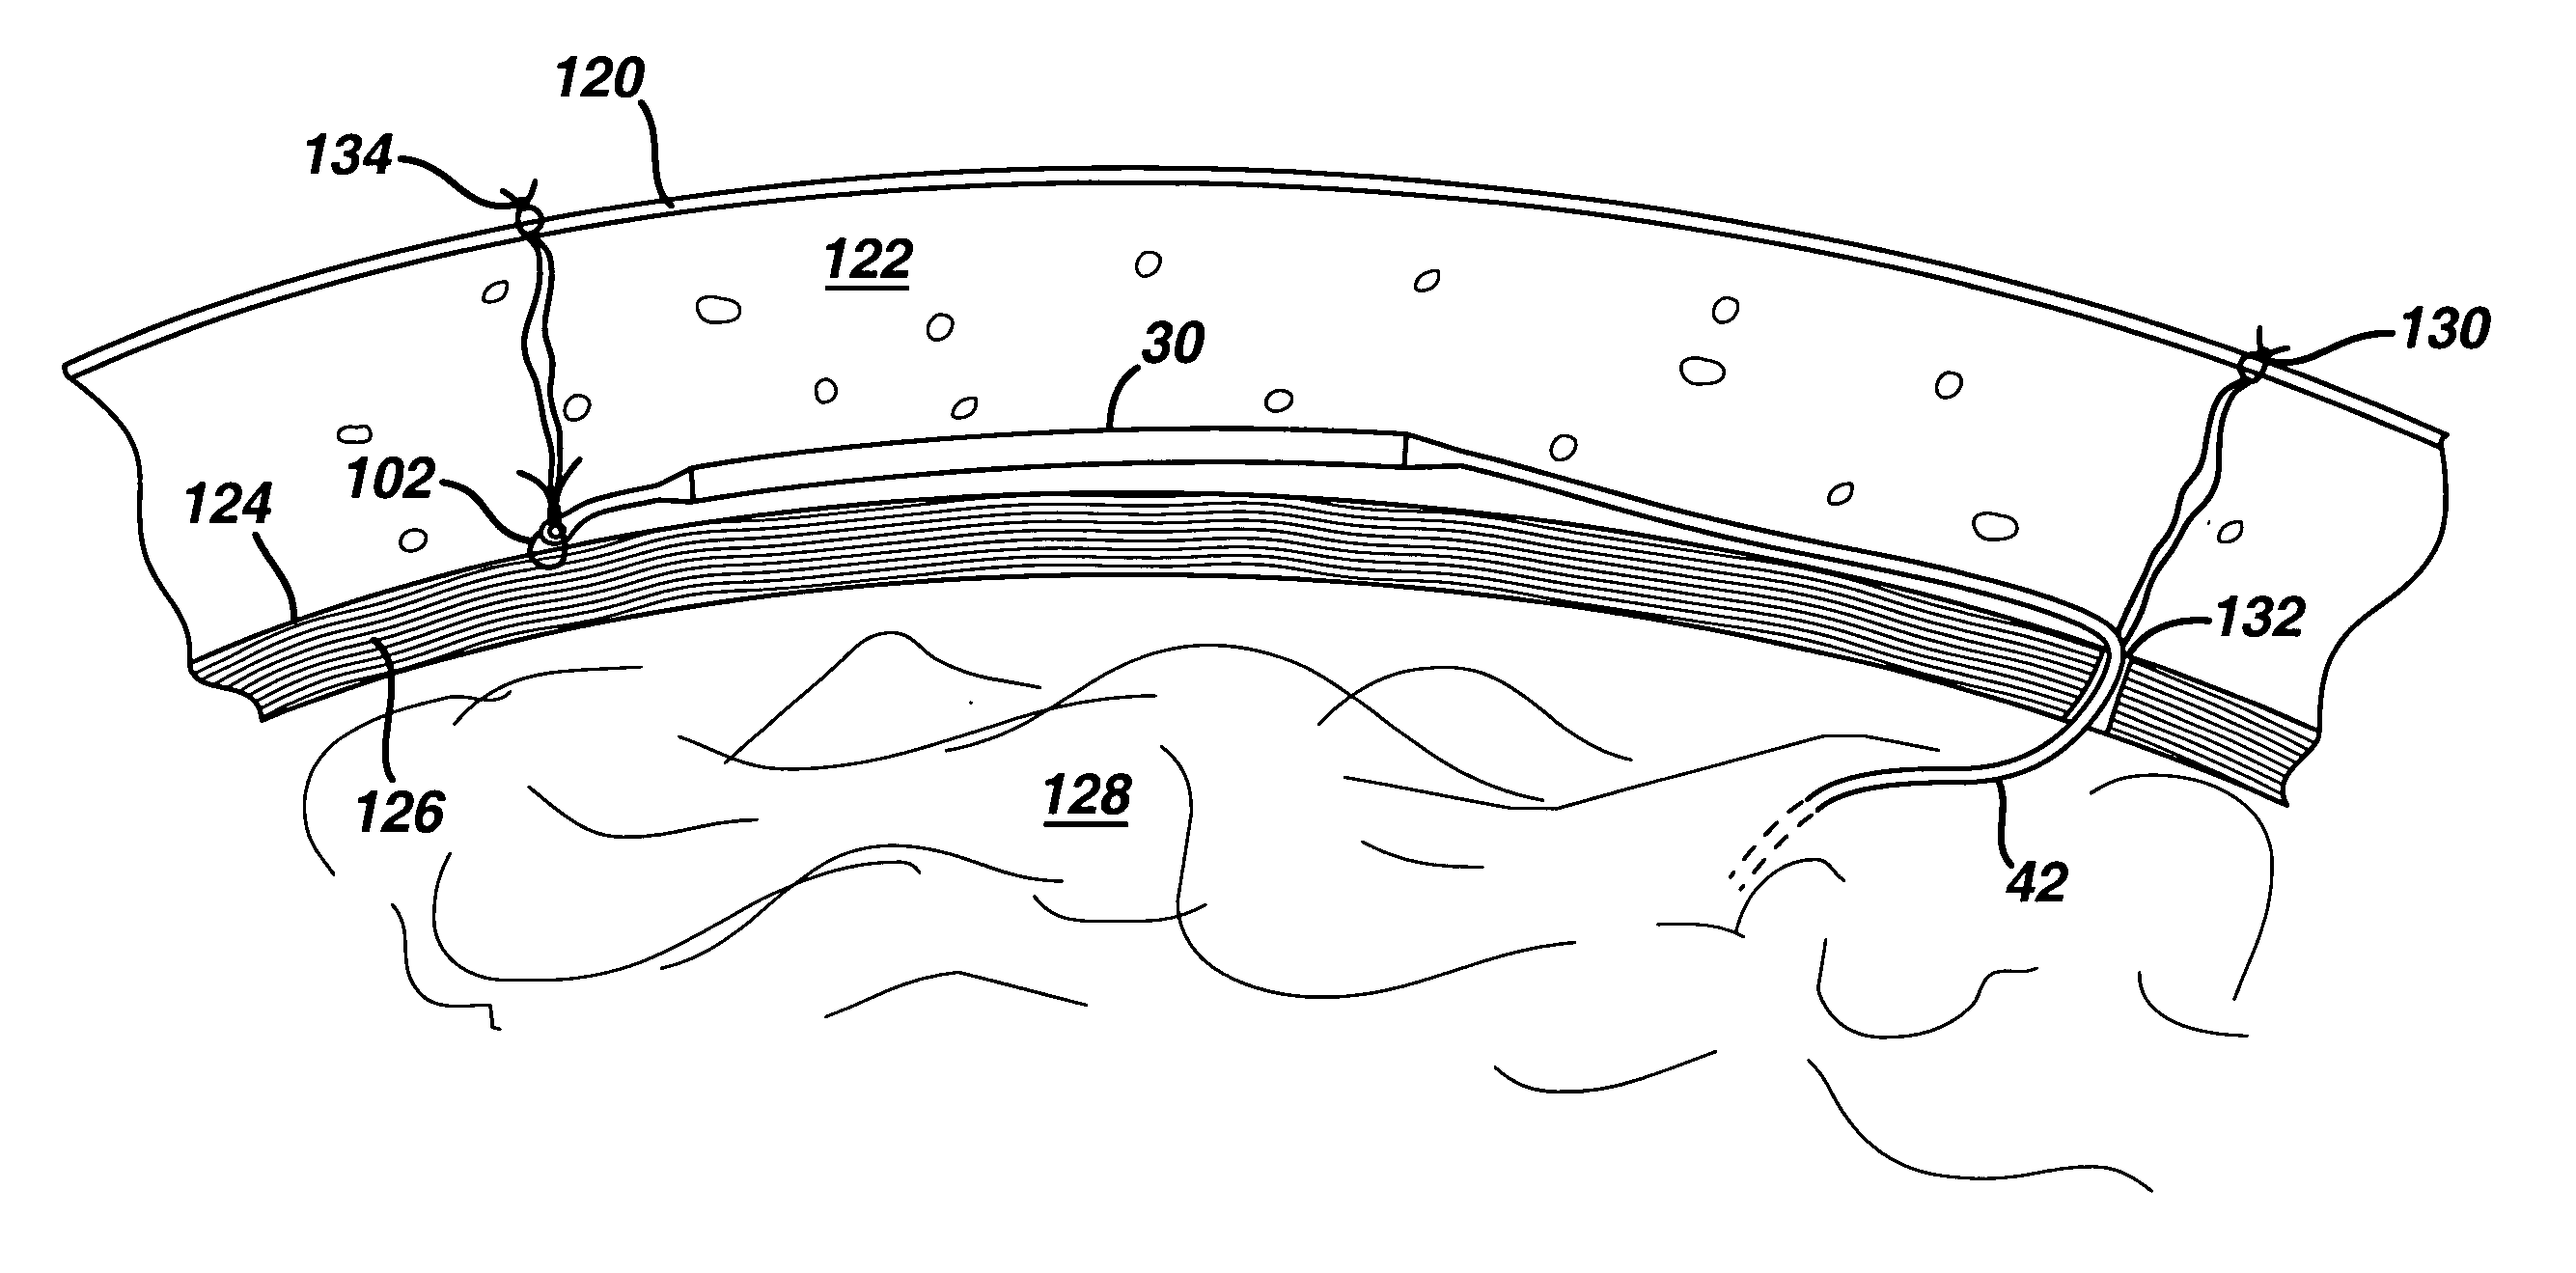 Method for implanting flexible injection port